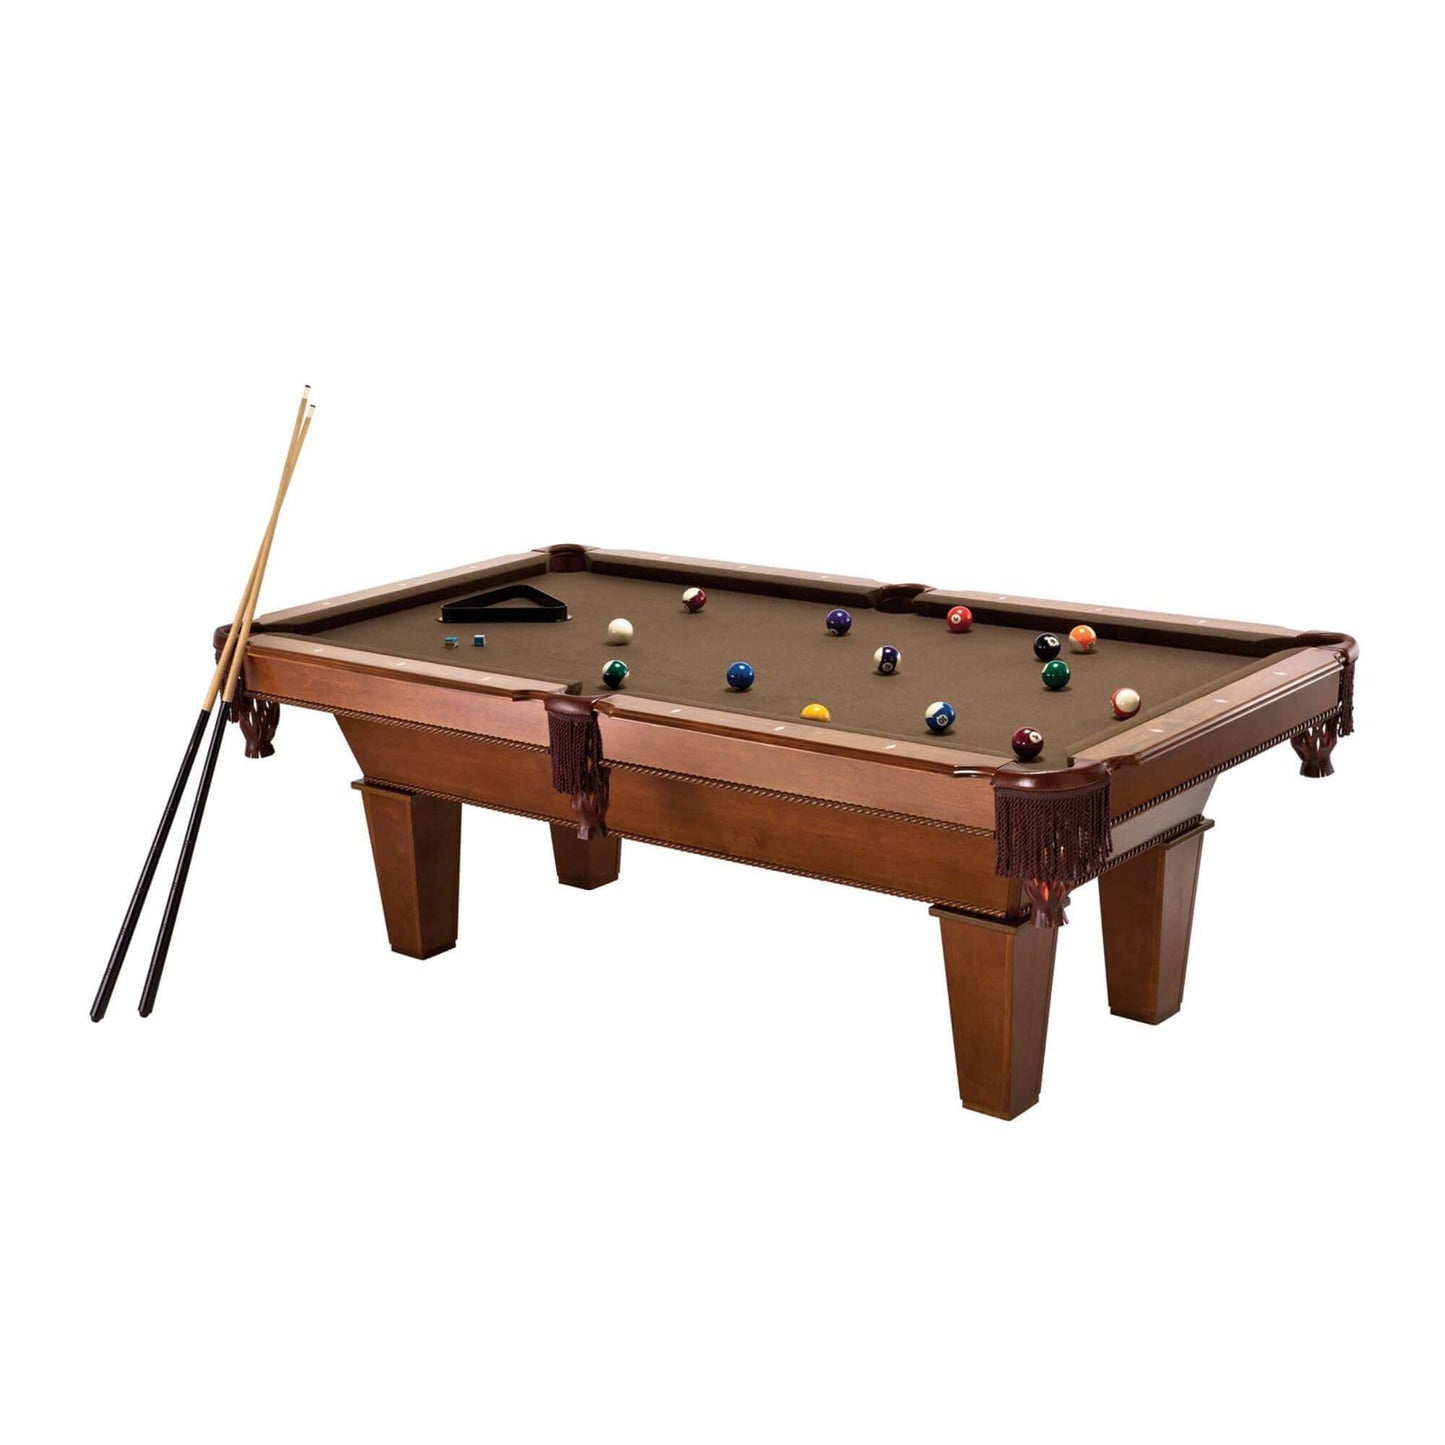 Fat Cat™ Frisco 7.5' Billiard Table with Play Package set up with balls and cue sticks